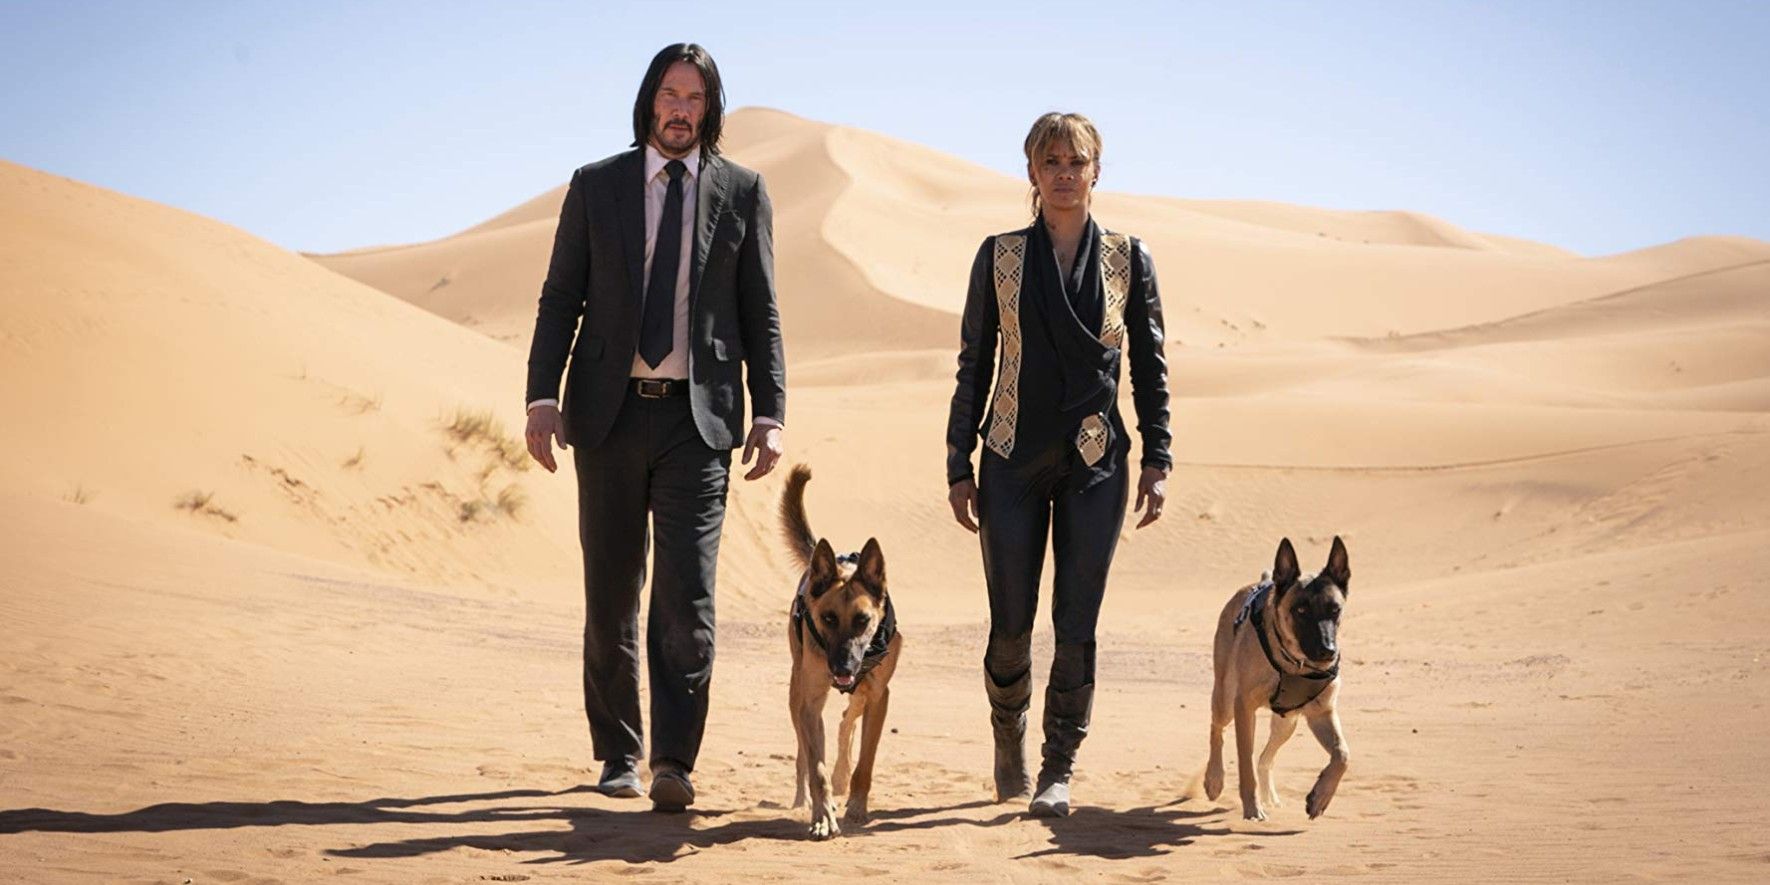 John Wick walks through the desert with his dog in Chapter 3- Parabellum